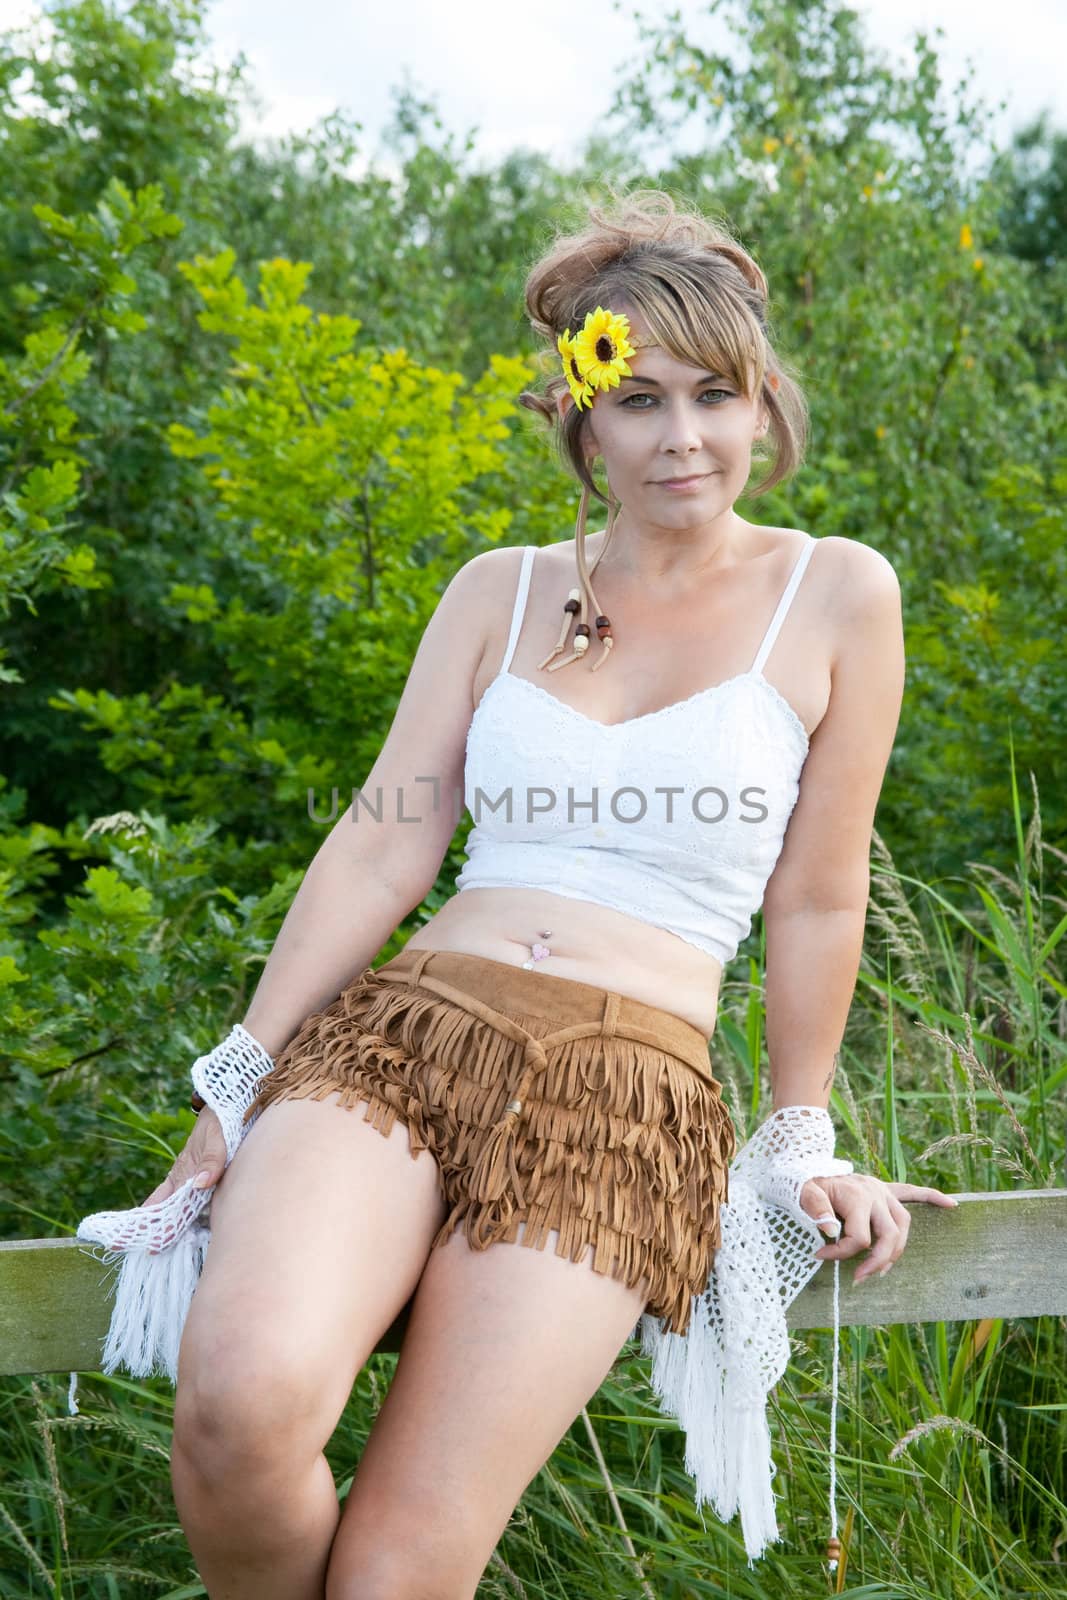 portrait of woman in shorts sitting on a fence in a rural setting